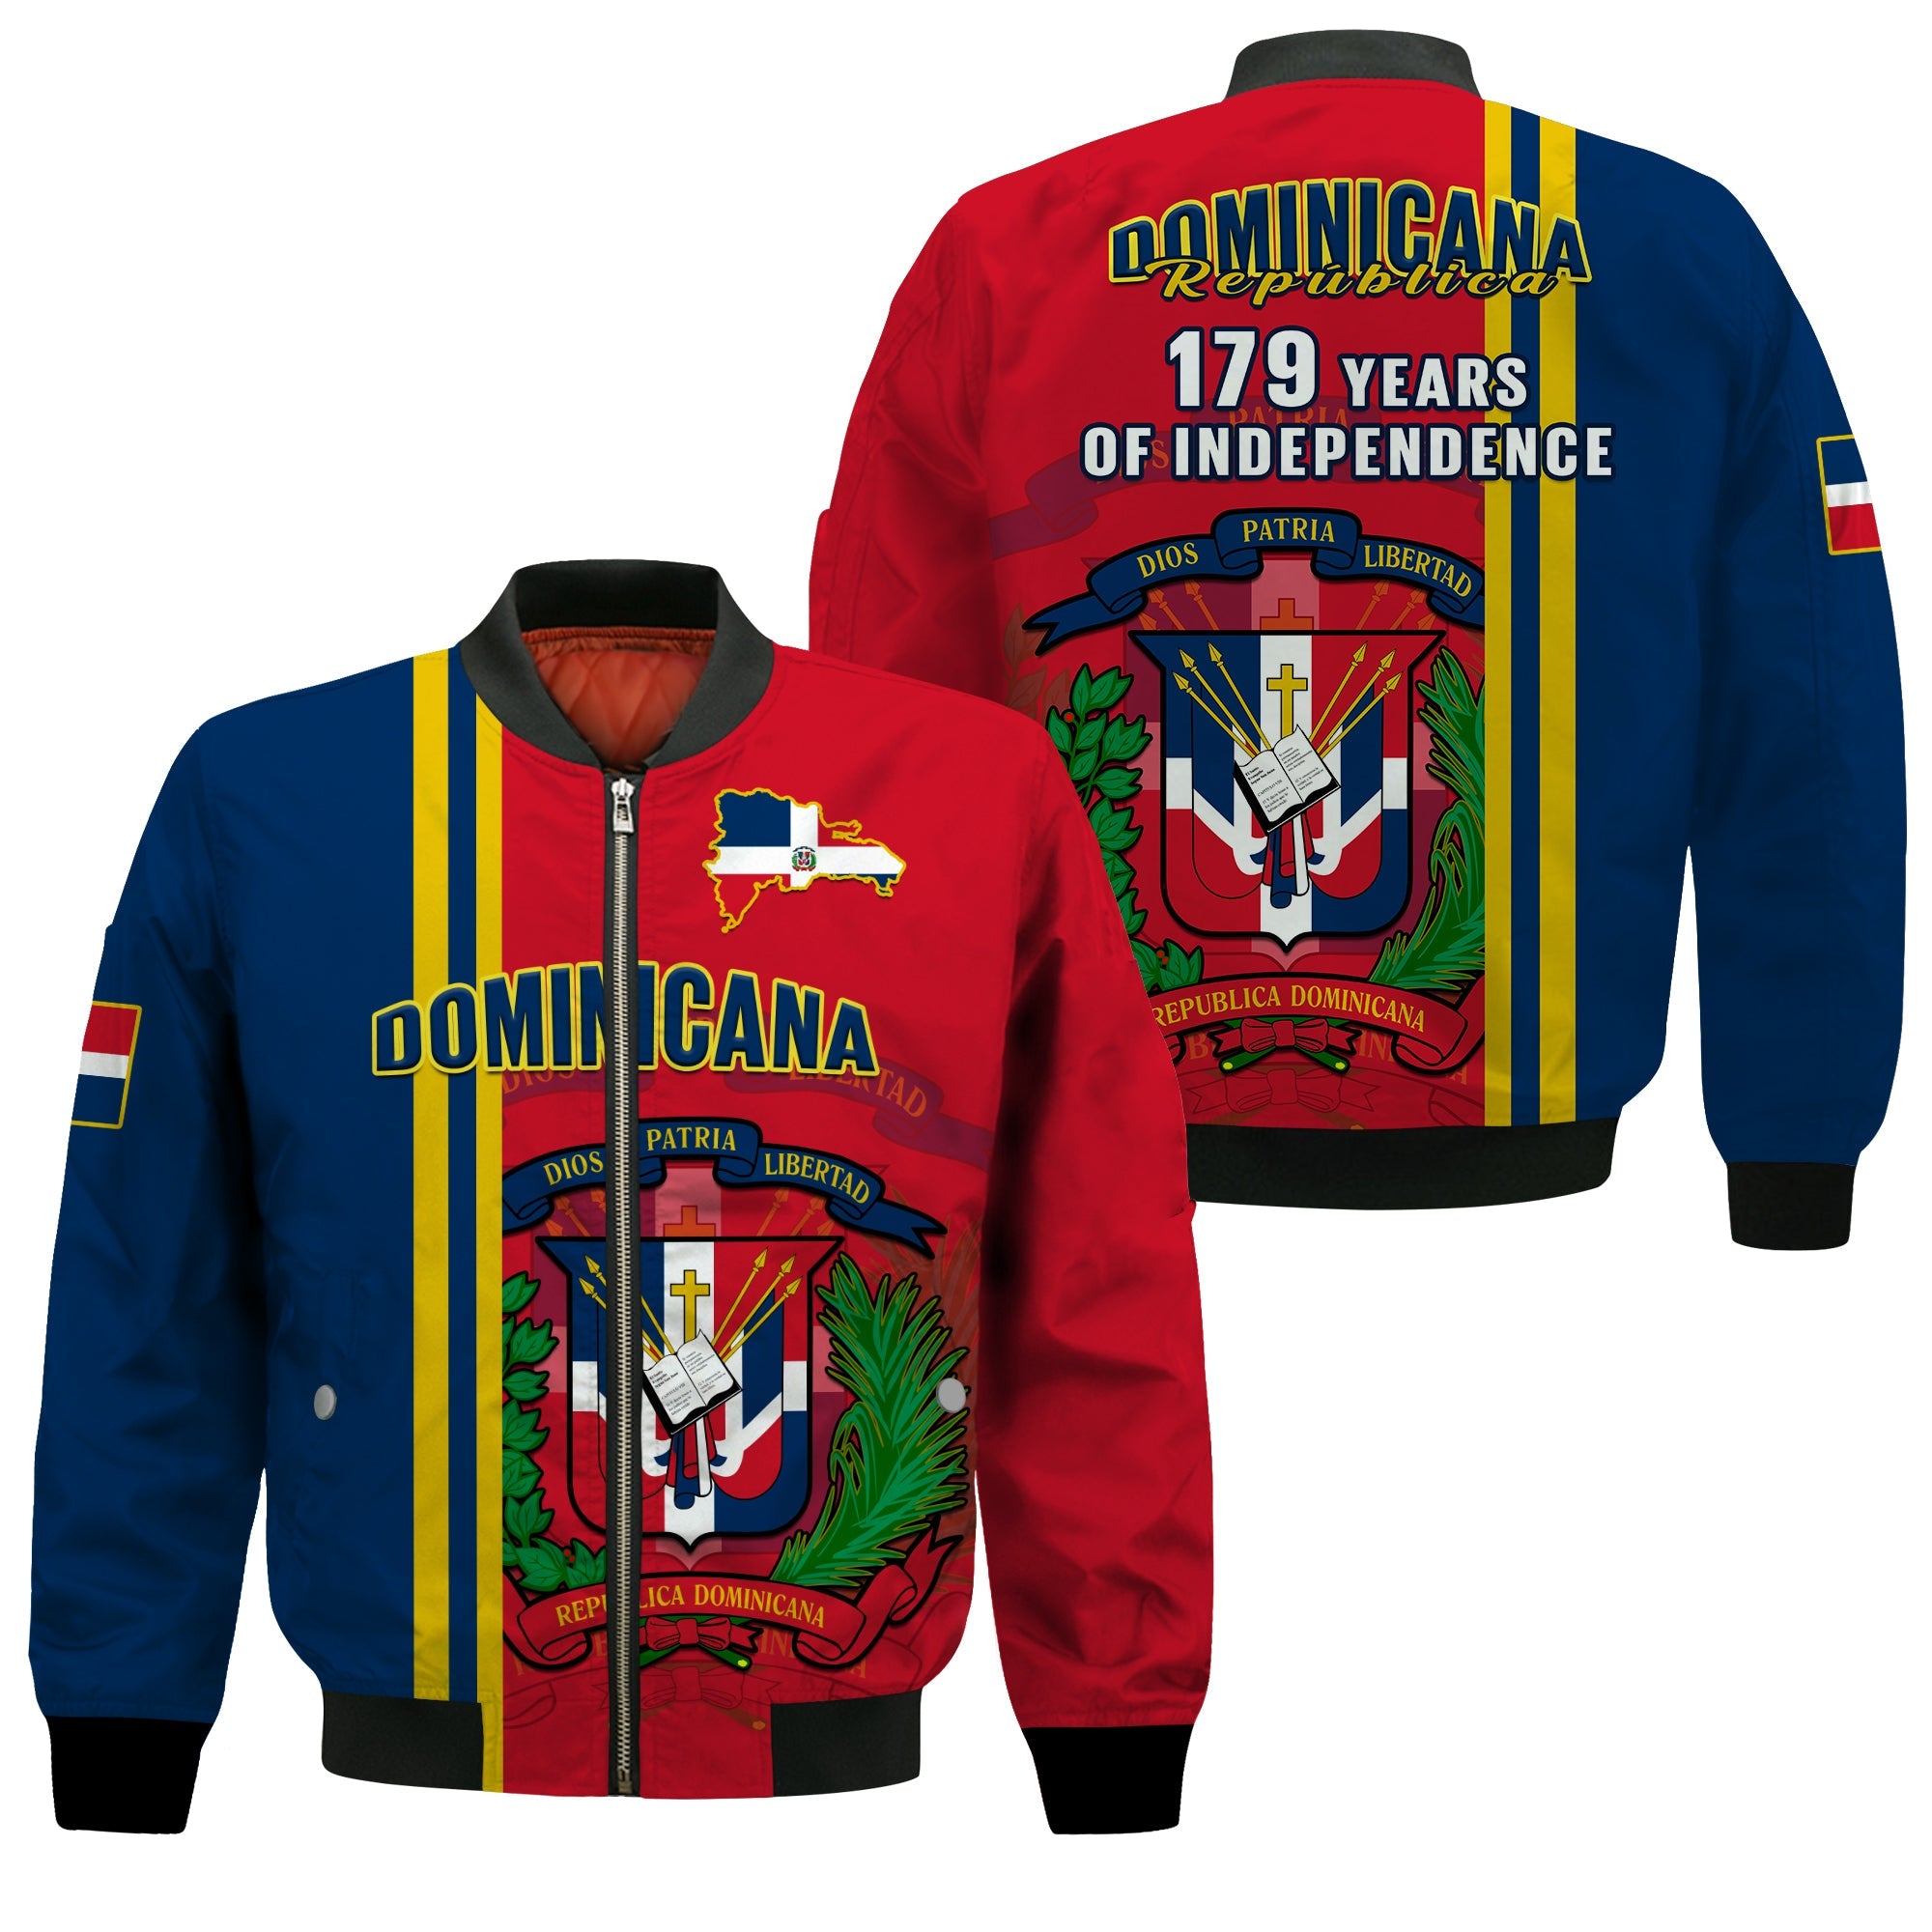 dominican-republic-bomber-jacket-happy-179-years-of-independence